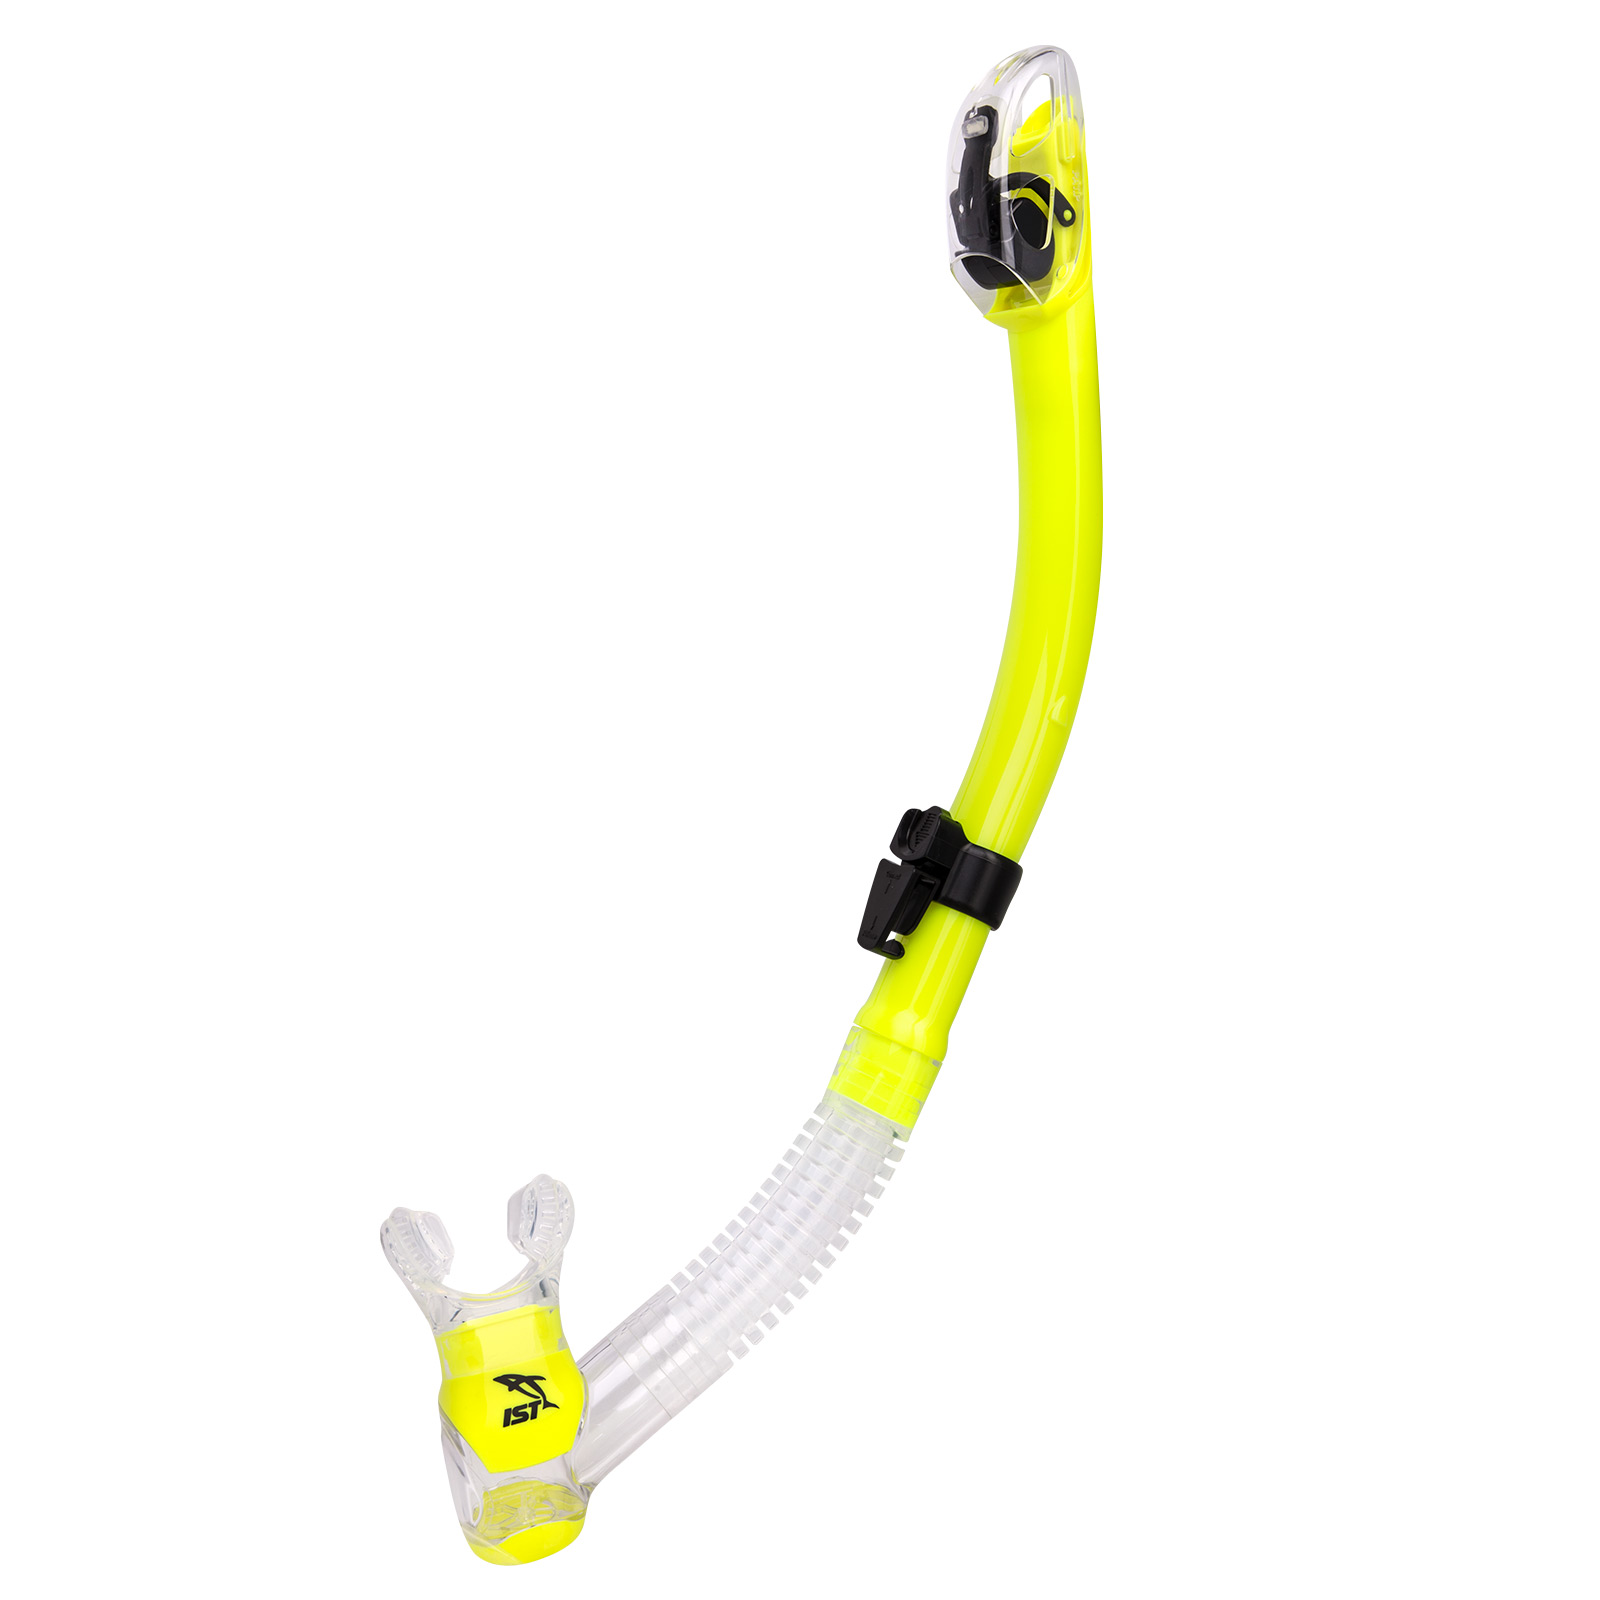 IST Dry Snorkel For Scuba Diving 